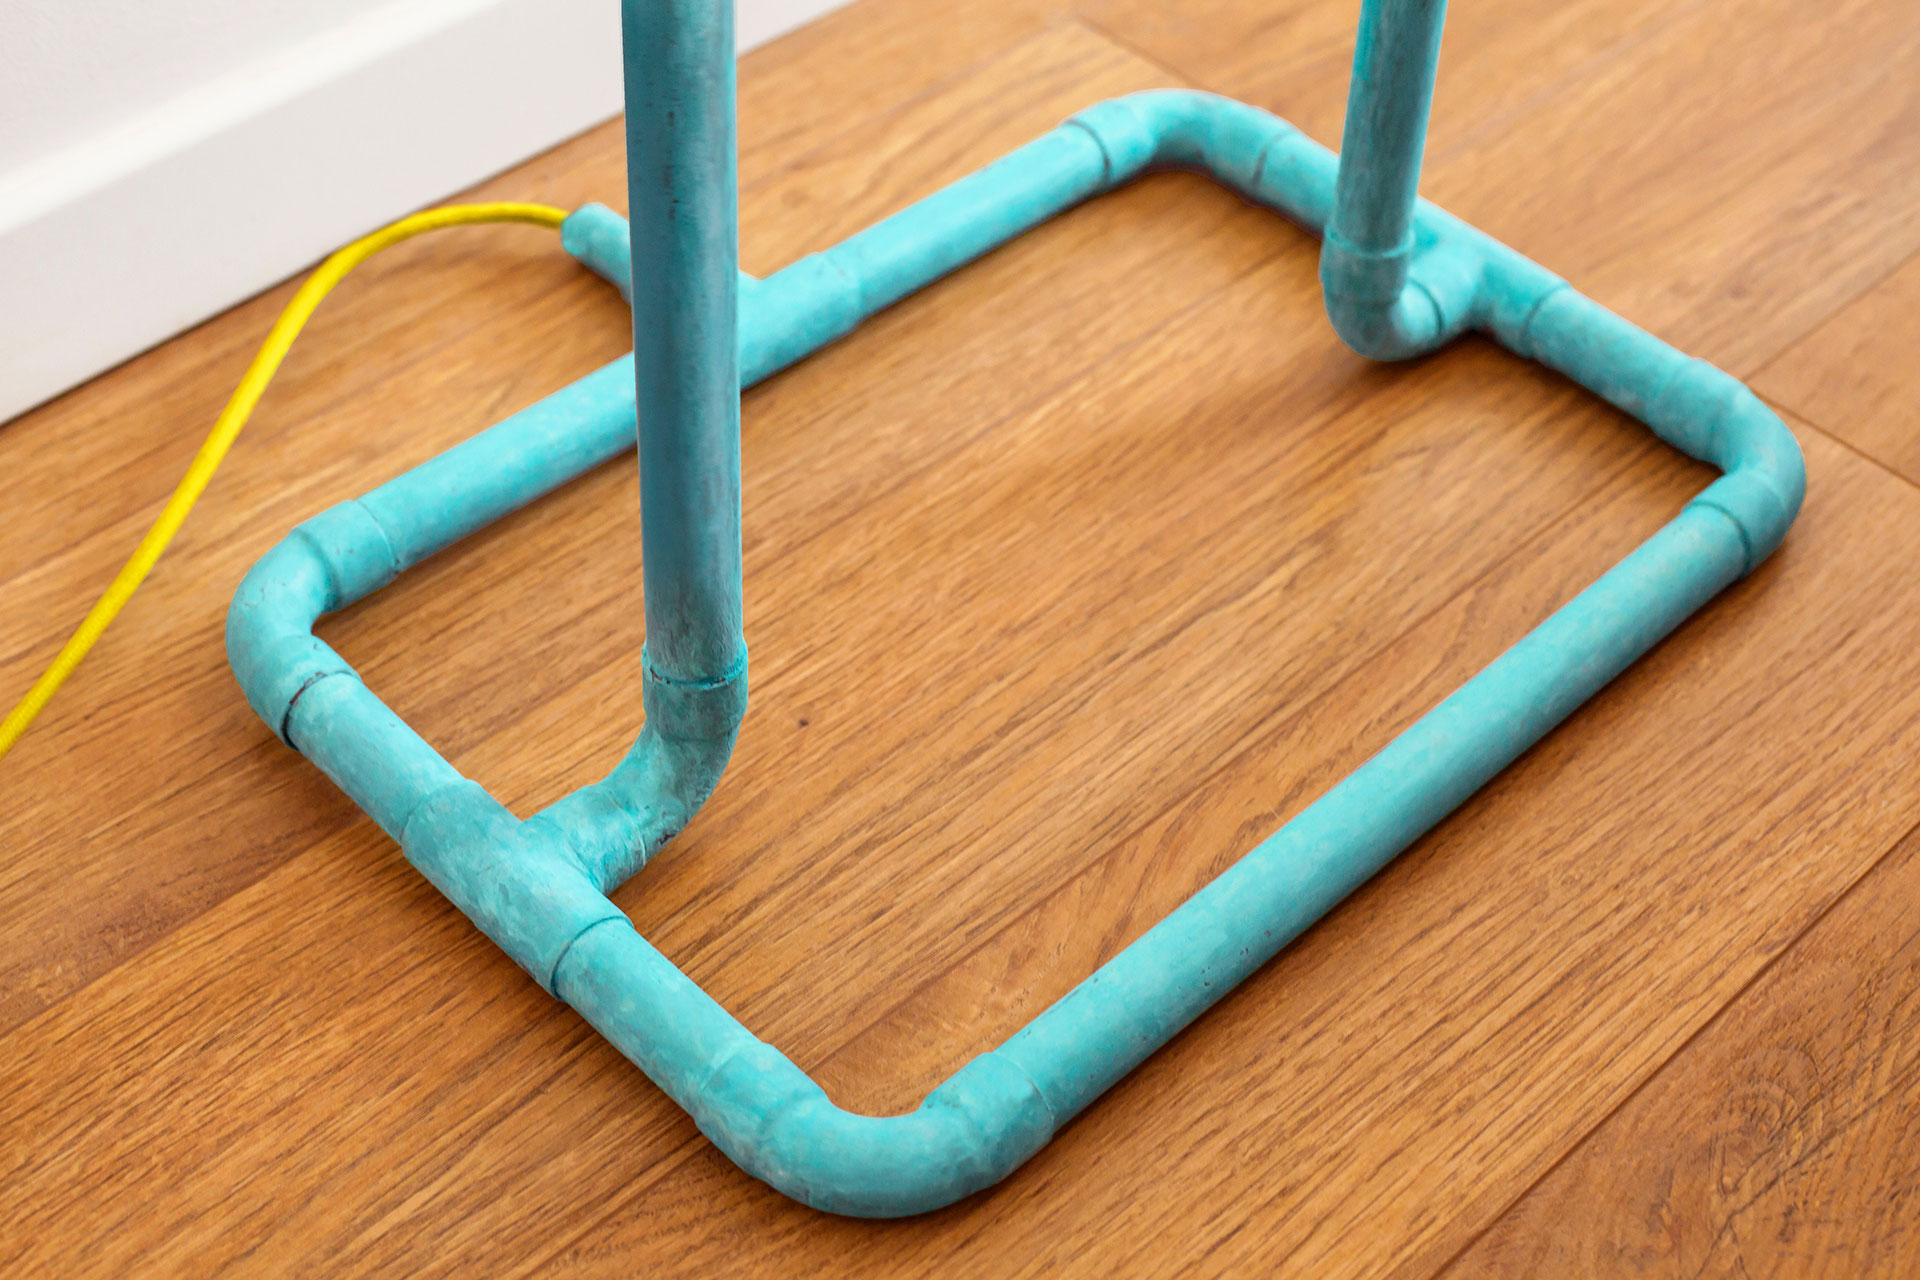 Colorful design floor lamp in turquoise patina with yellow braided cord